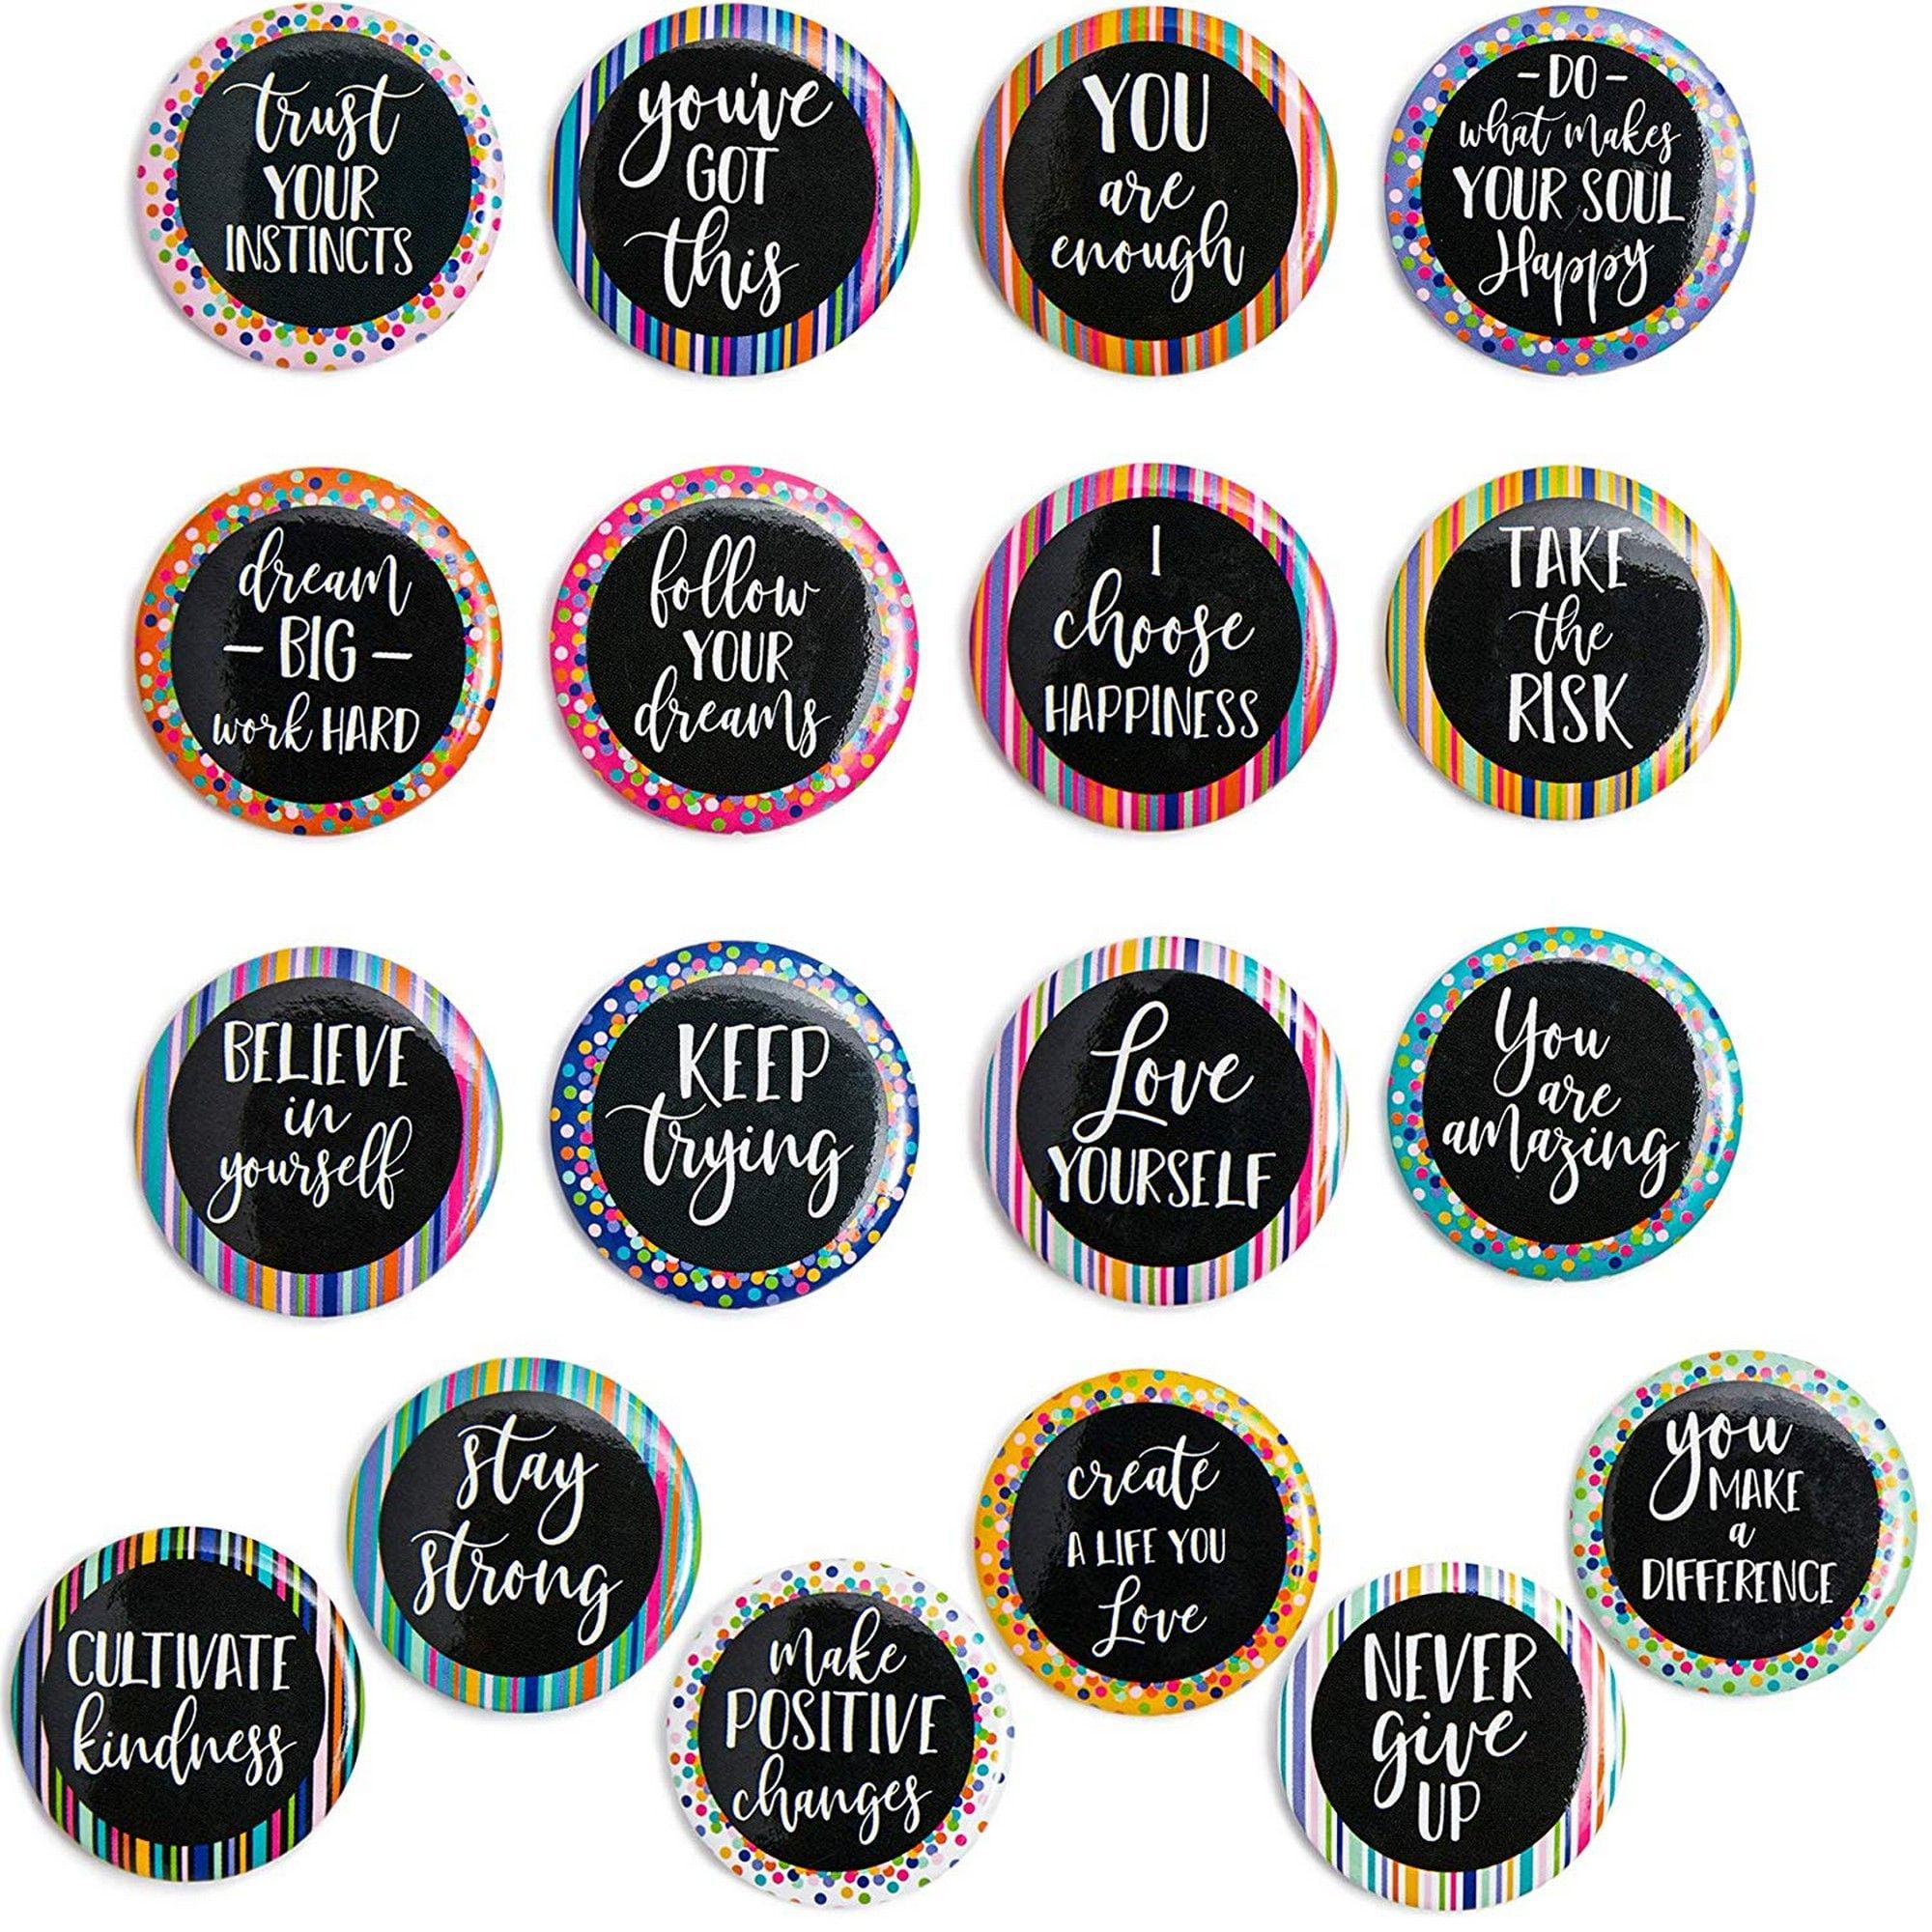 Classroom 18-Pack Motivational Magnets for Lockers or Fridge Students Teacher Gifts 1.25 Inches in Diameter Locker Magnets Teachers for Office Inspirational Magnets with Encouragement Quotes